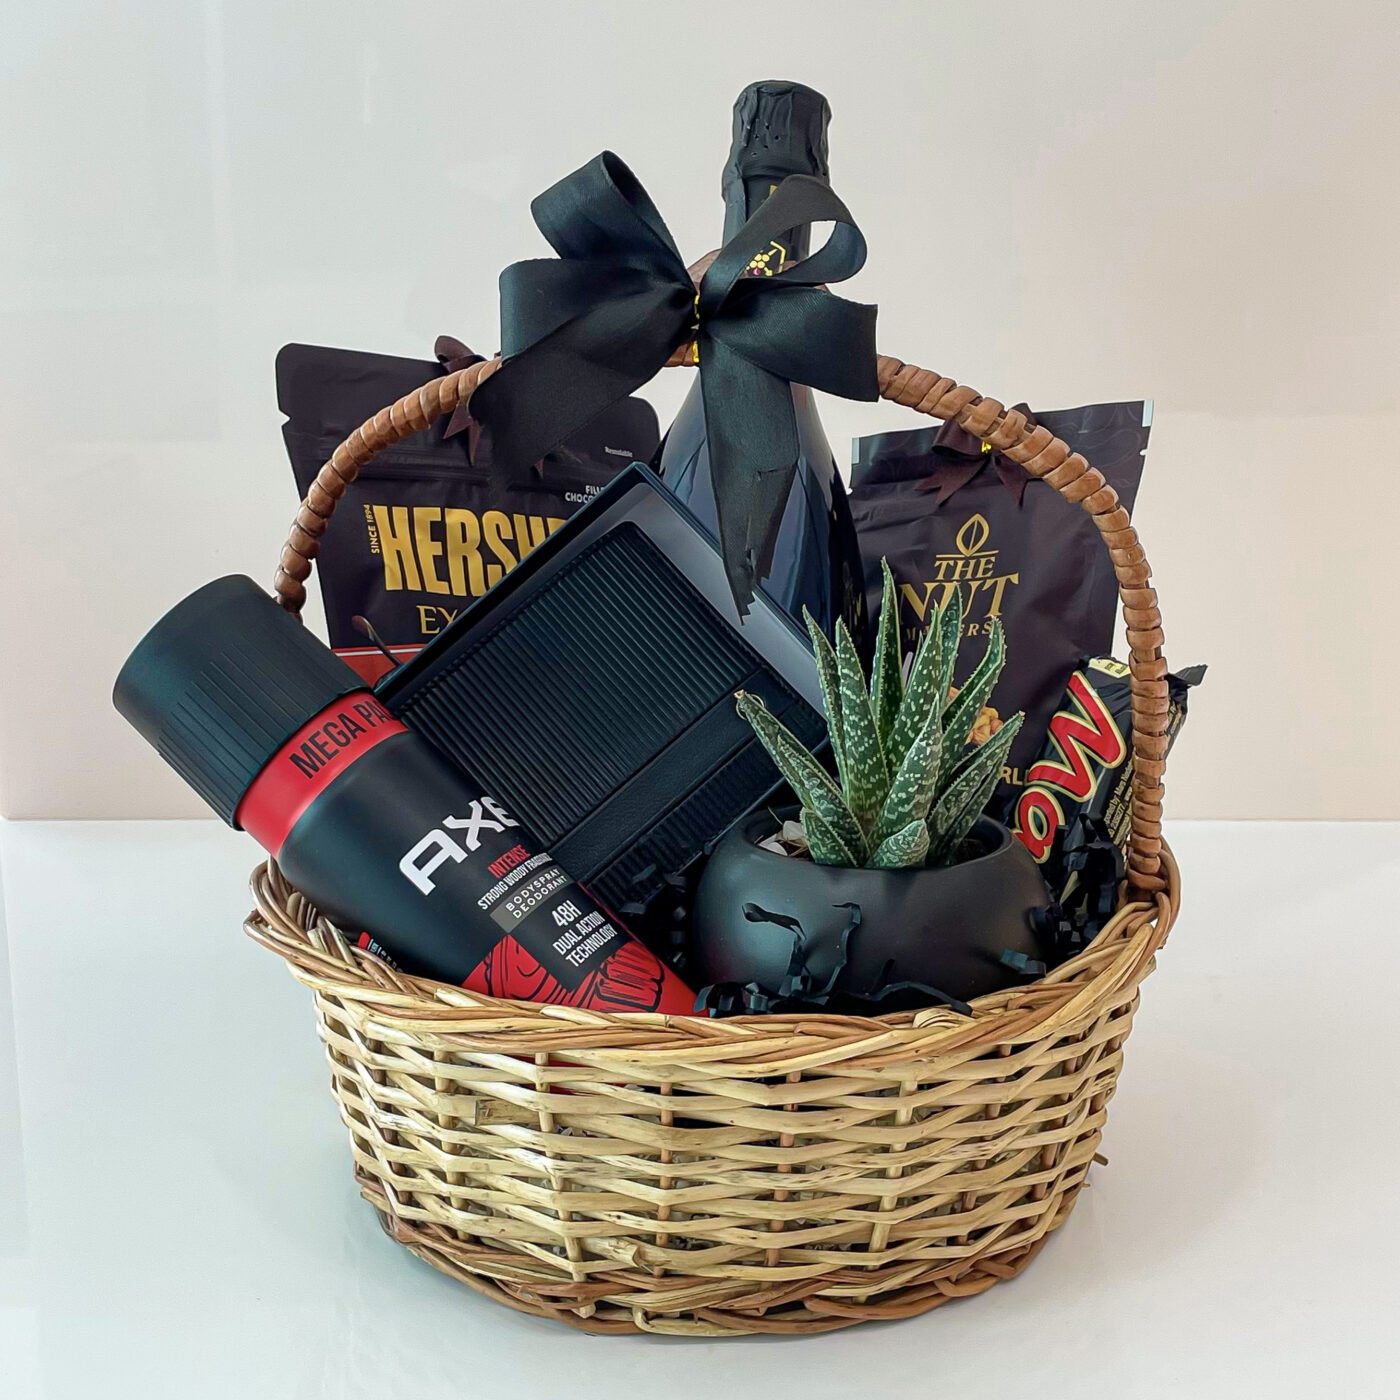 18 Hotel Welcome Basket Ideas Your Guests Will Love | Cvent Blog